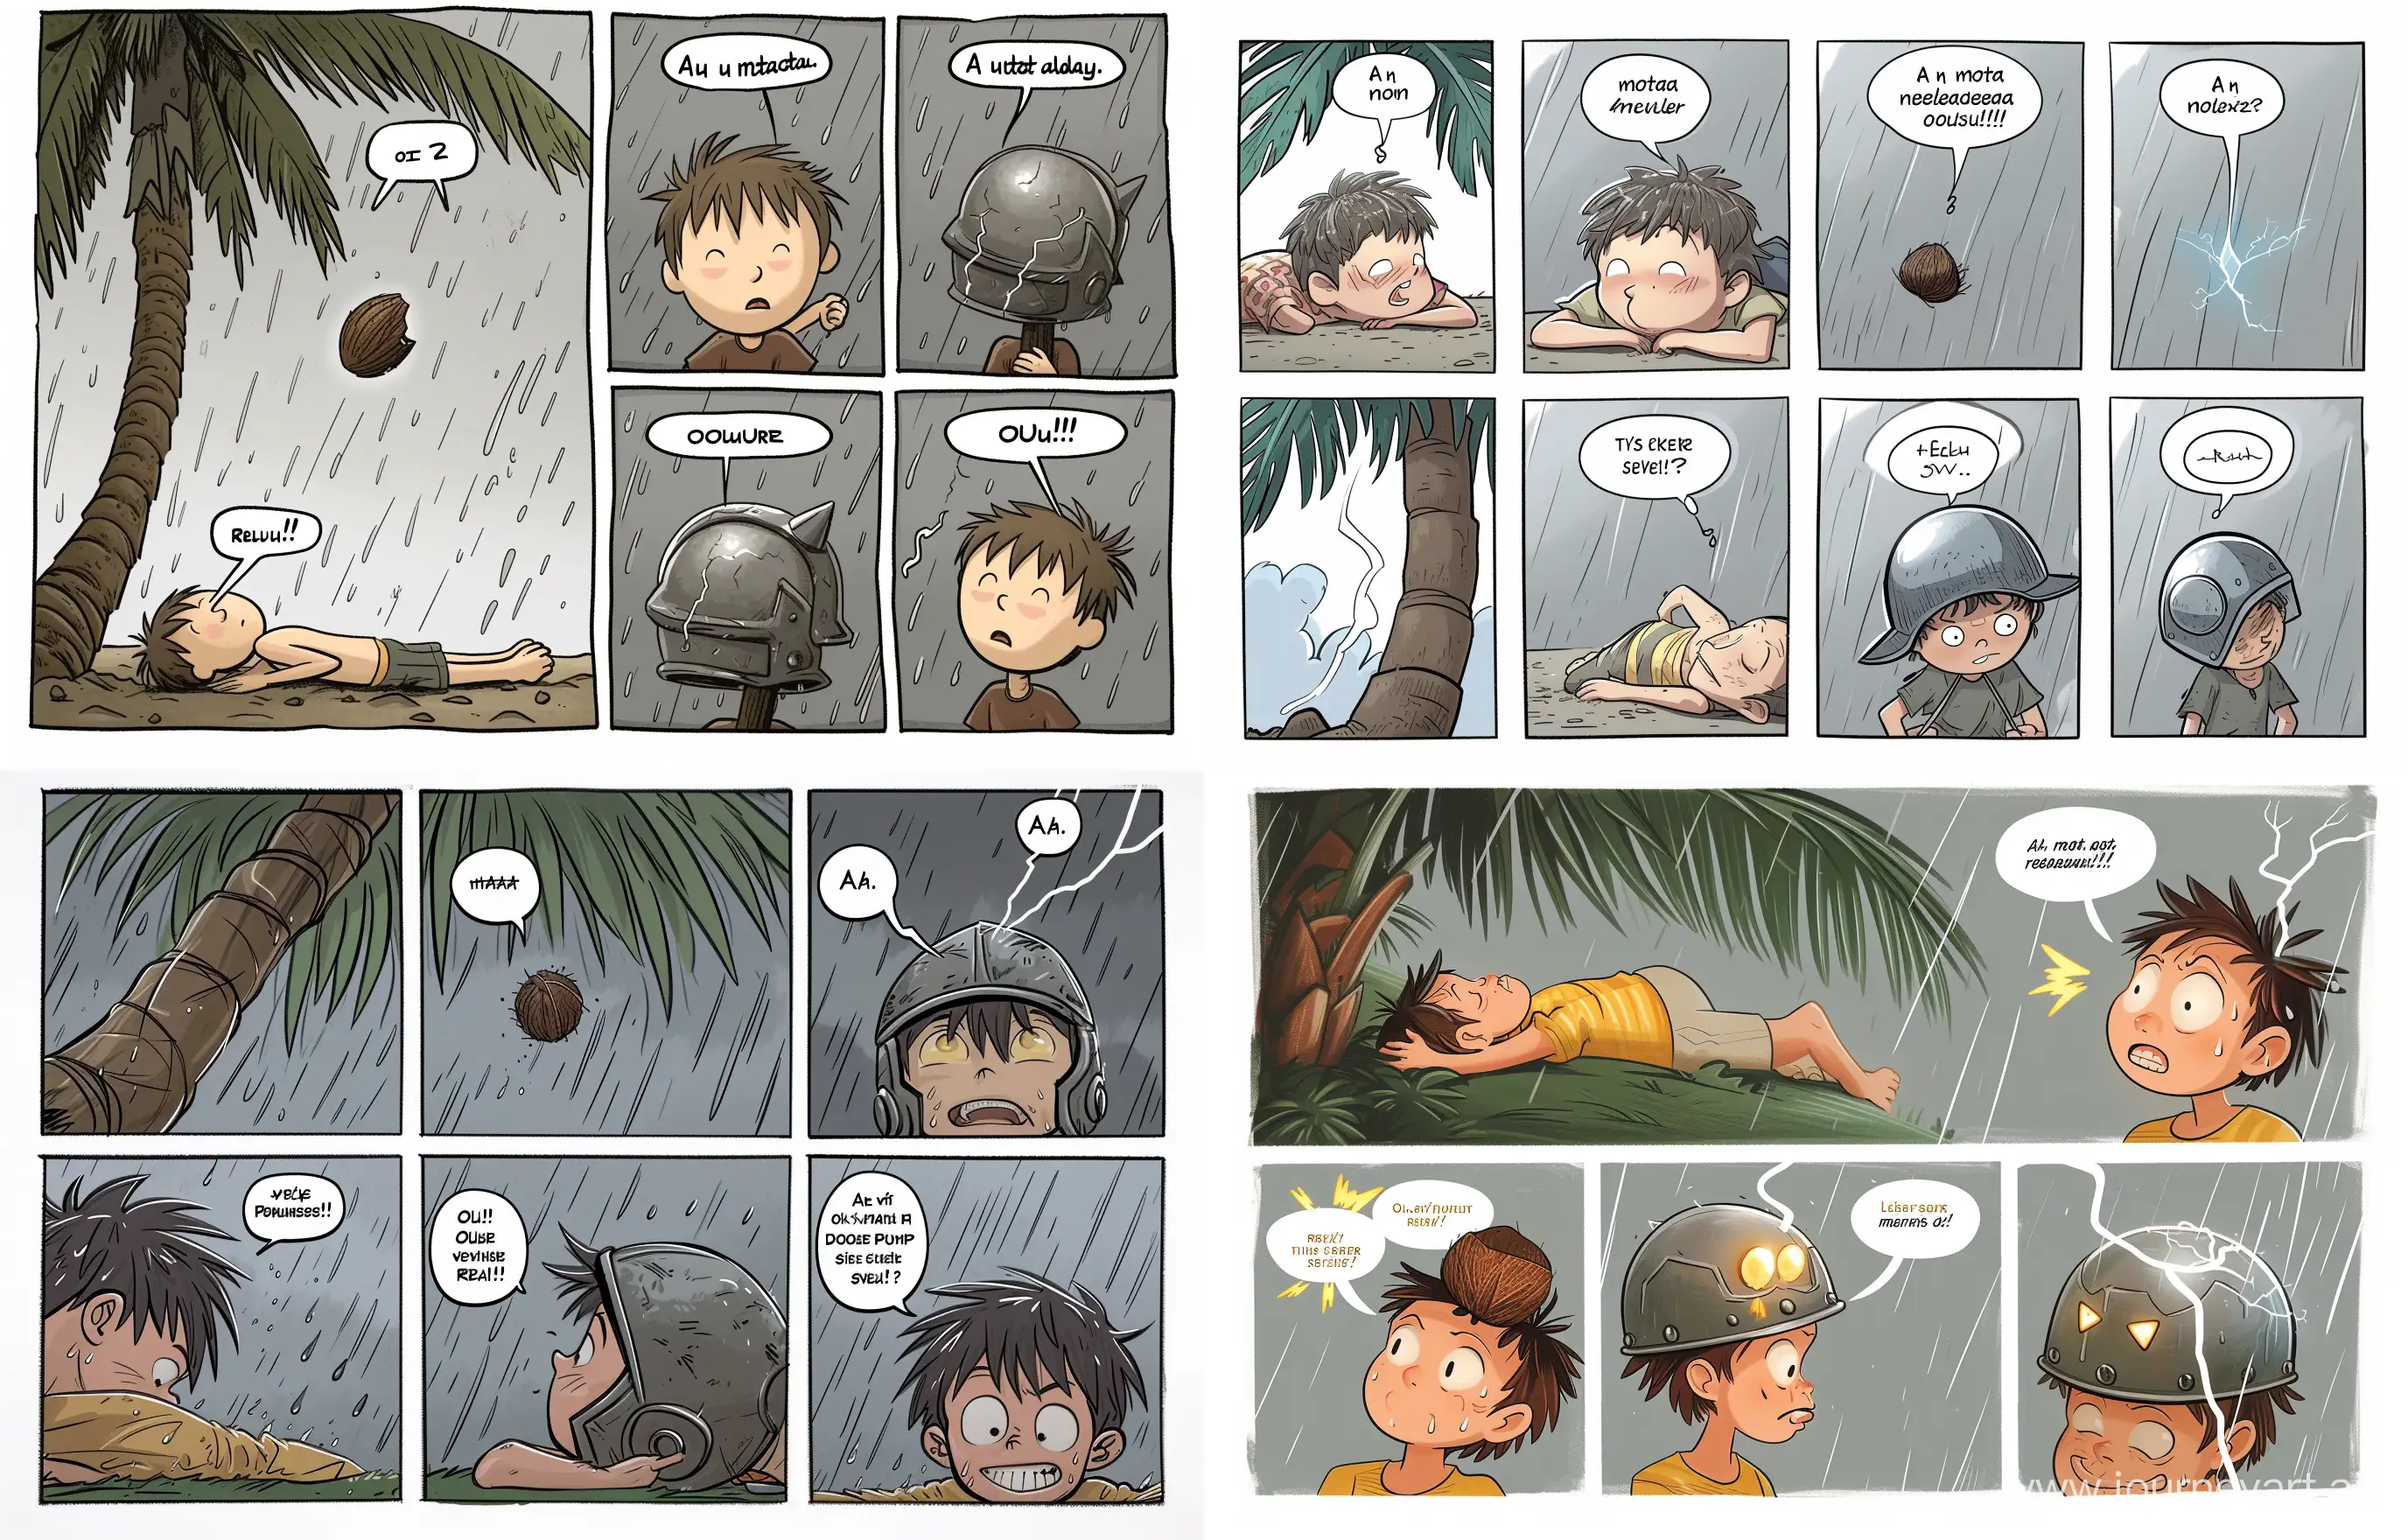 A revised version of the four-panel comic strip with speech bubbles added to each panel, in a humorous style. Panel 1: A boy lying under a palm tree, saying 'Ah, what a relaxing day!'. Panel 2: As a coconut falls on his head, he exclaims 'Ouch!'. Panel 3: The boy, putting on an iron helmet, remarks 'This should keep me safe!'. Panel 4: Lightning strikes the boy's helmet, and he says 'Really?!' with a surprised expression. The sky is gray with rain clouds in the last panel. The comic should maintain a lighthearted and cartoonish feel. --v 6 --ar 14:9 --style raw